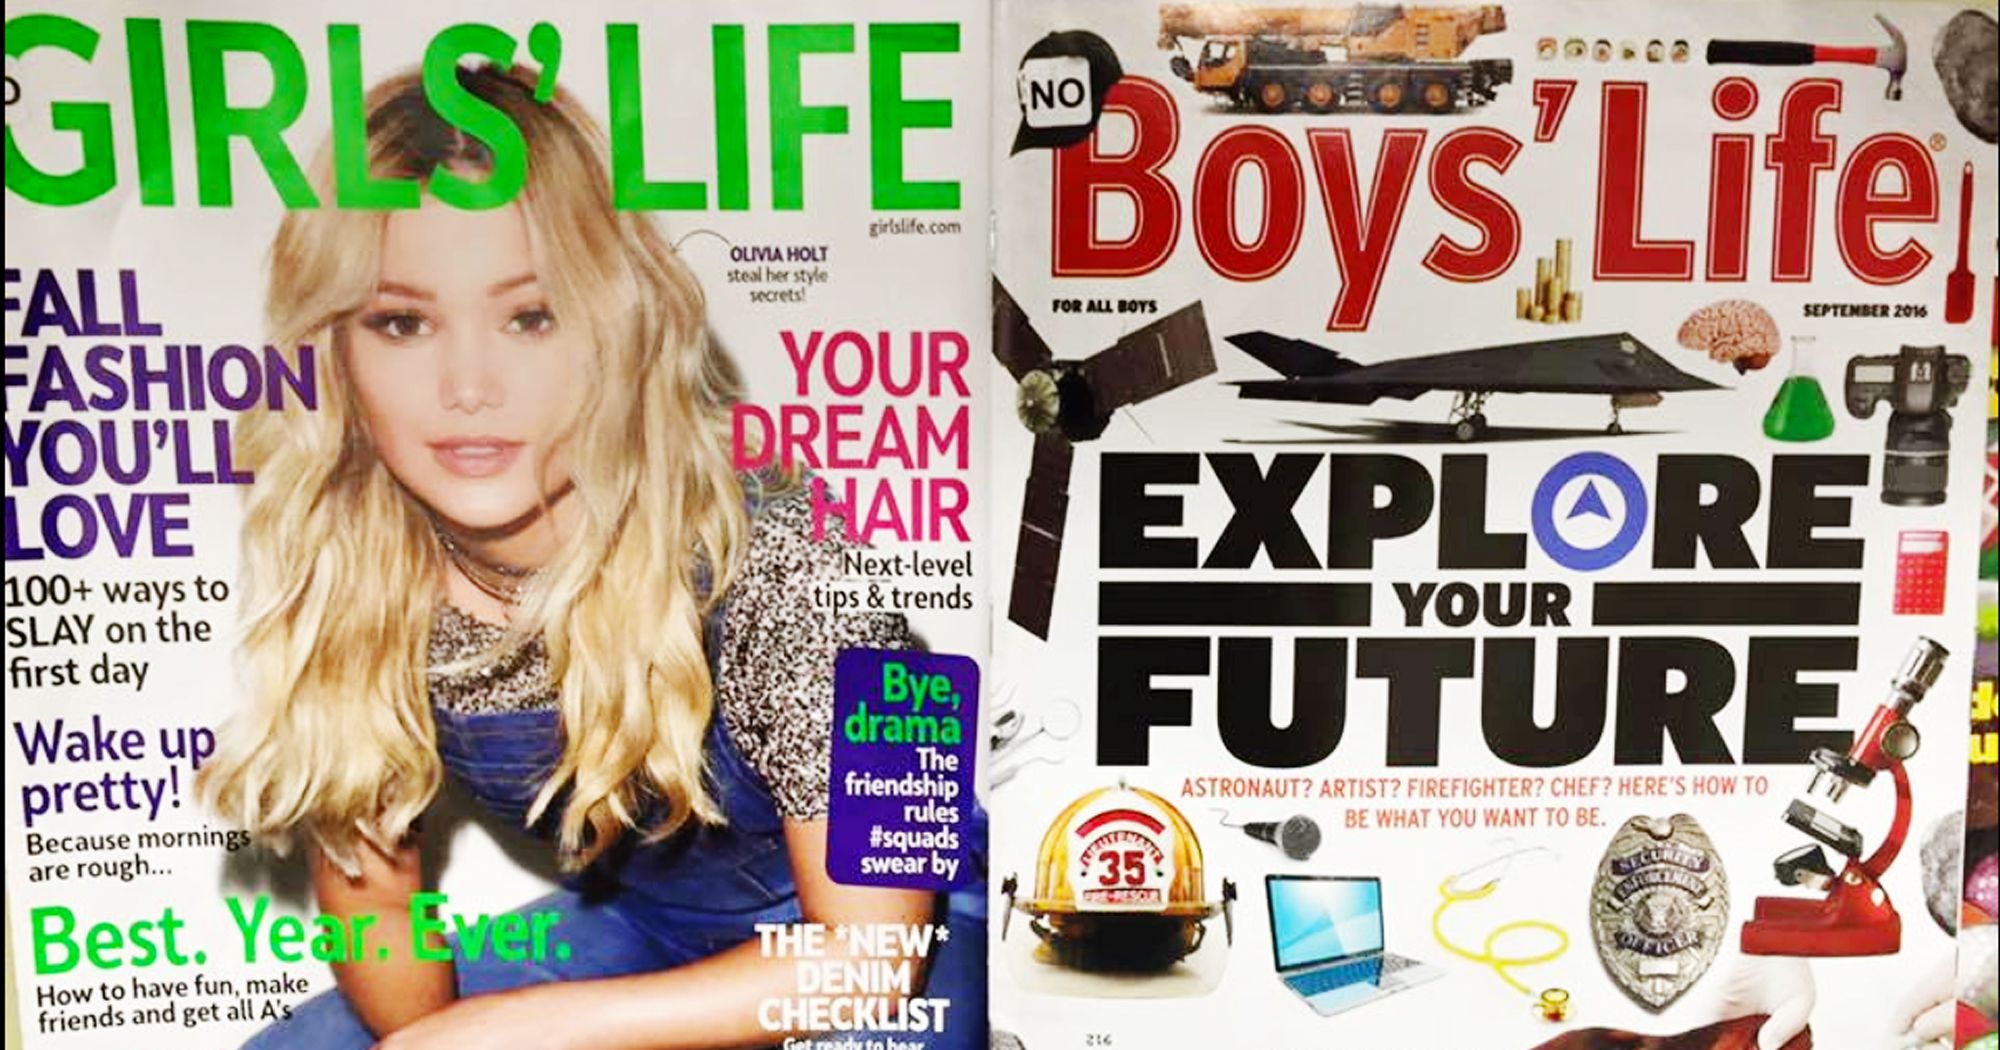 Girls Life Magazine Sexist Cover, Facebook Post